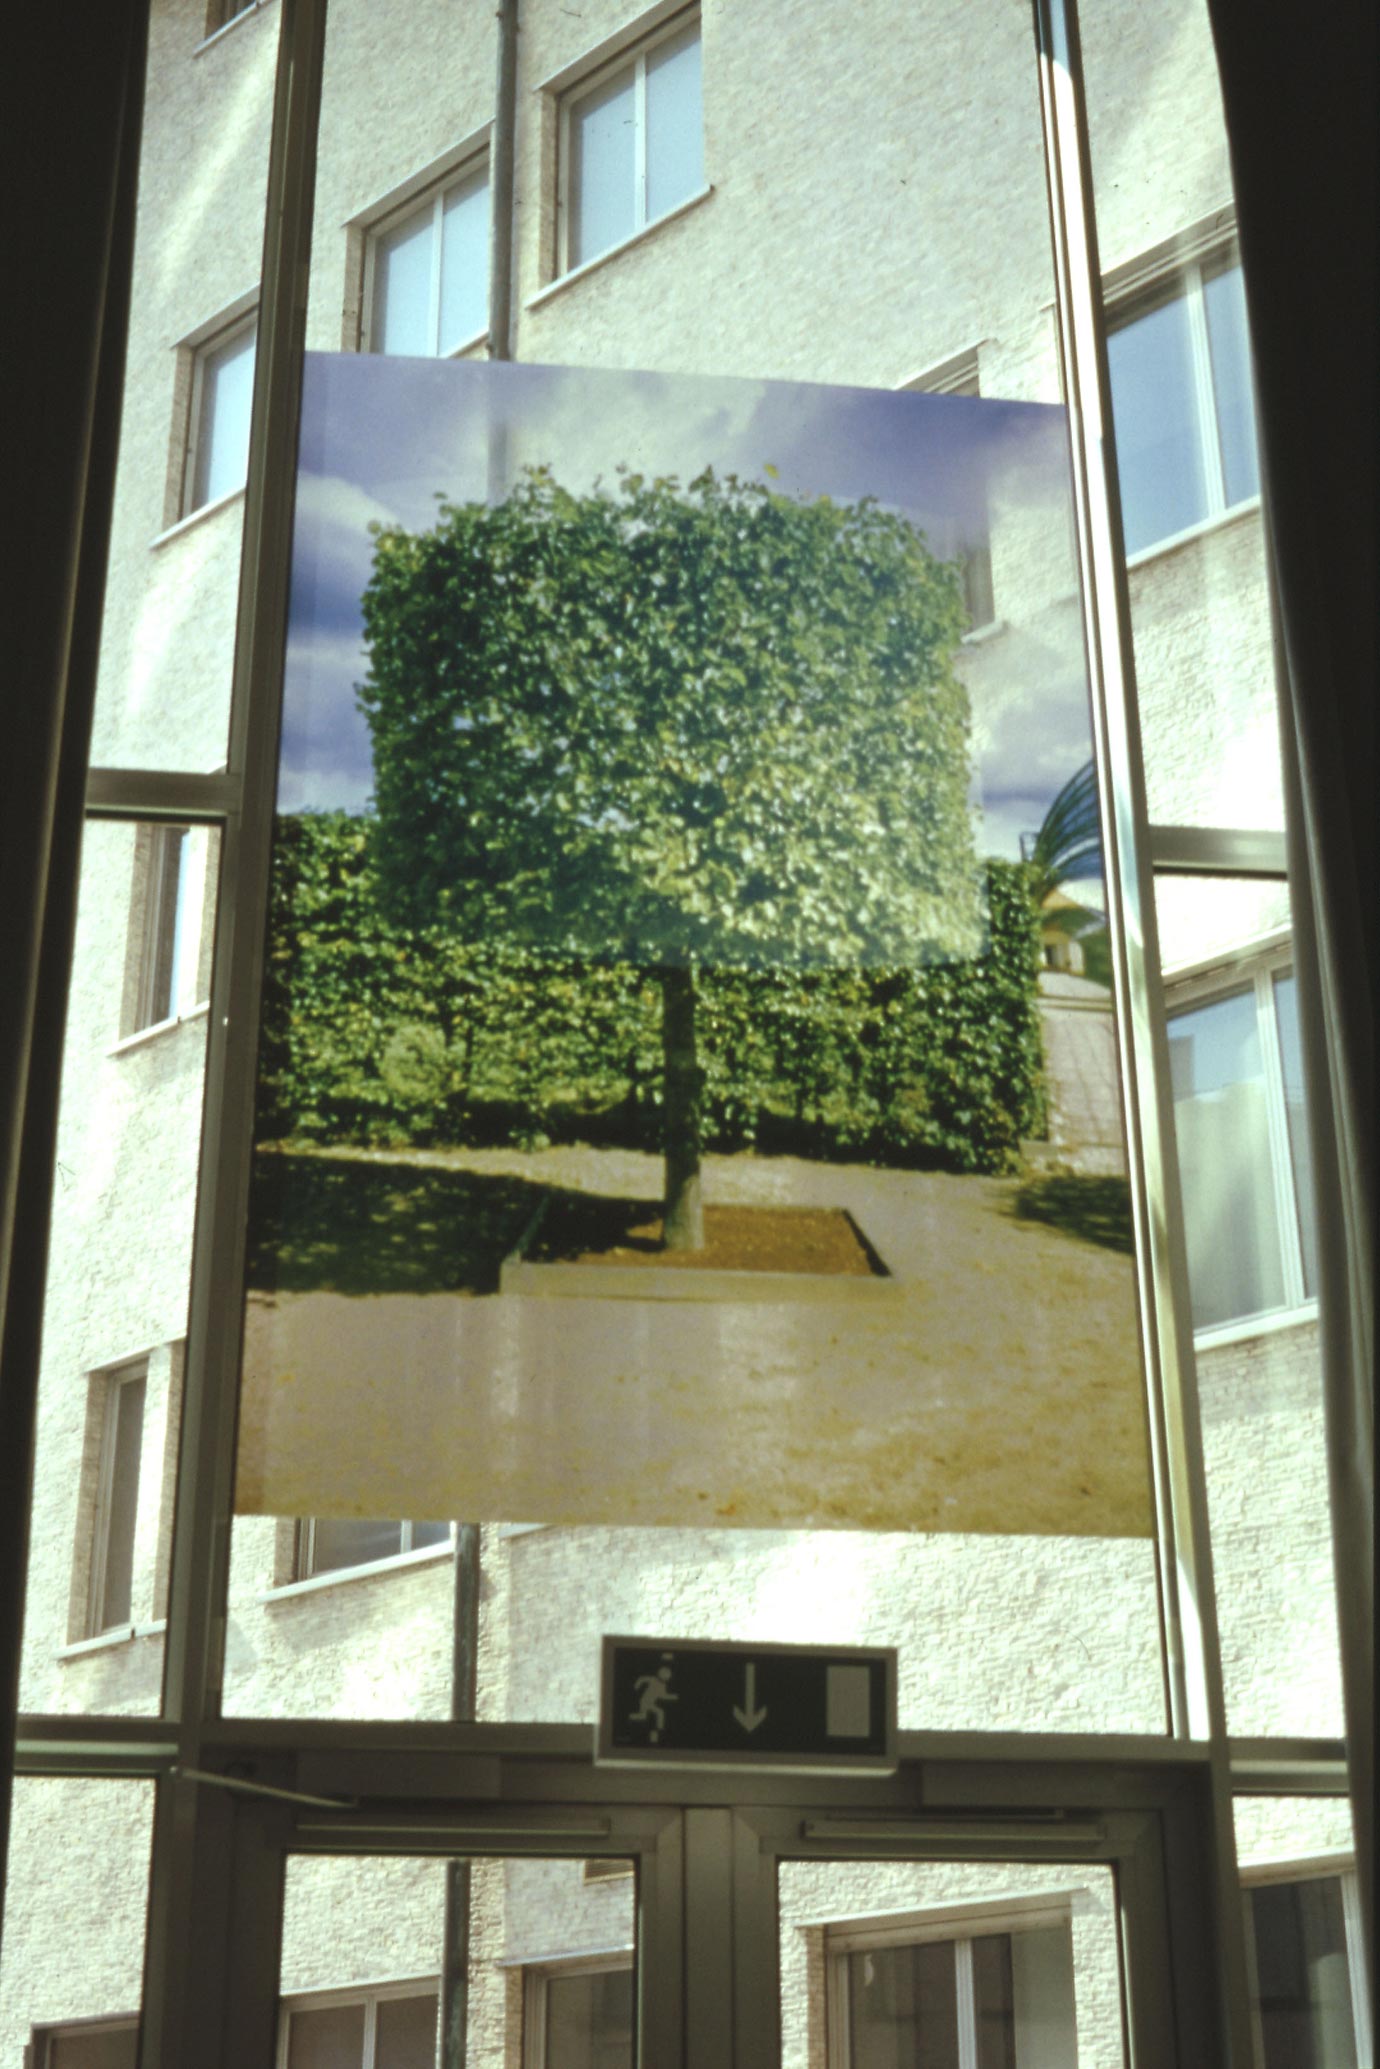 The photograph of the fifth tree